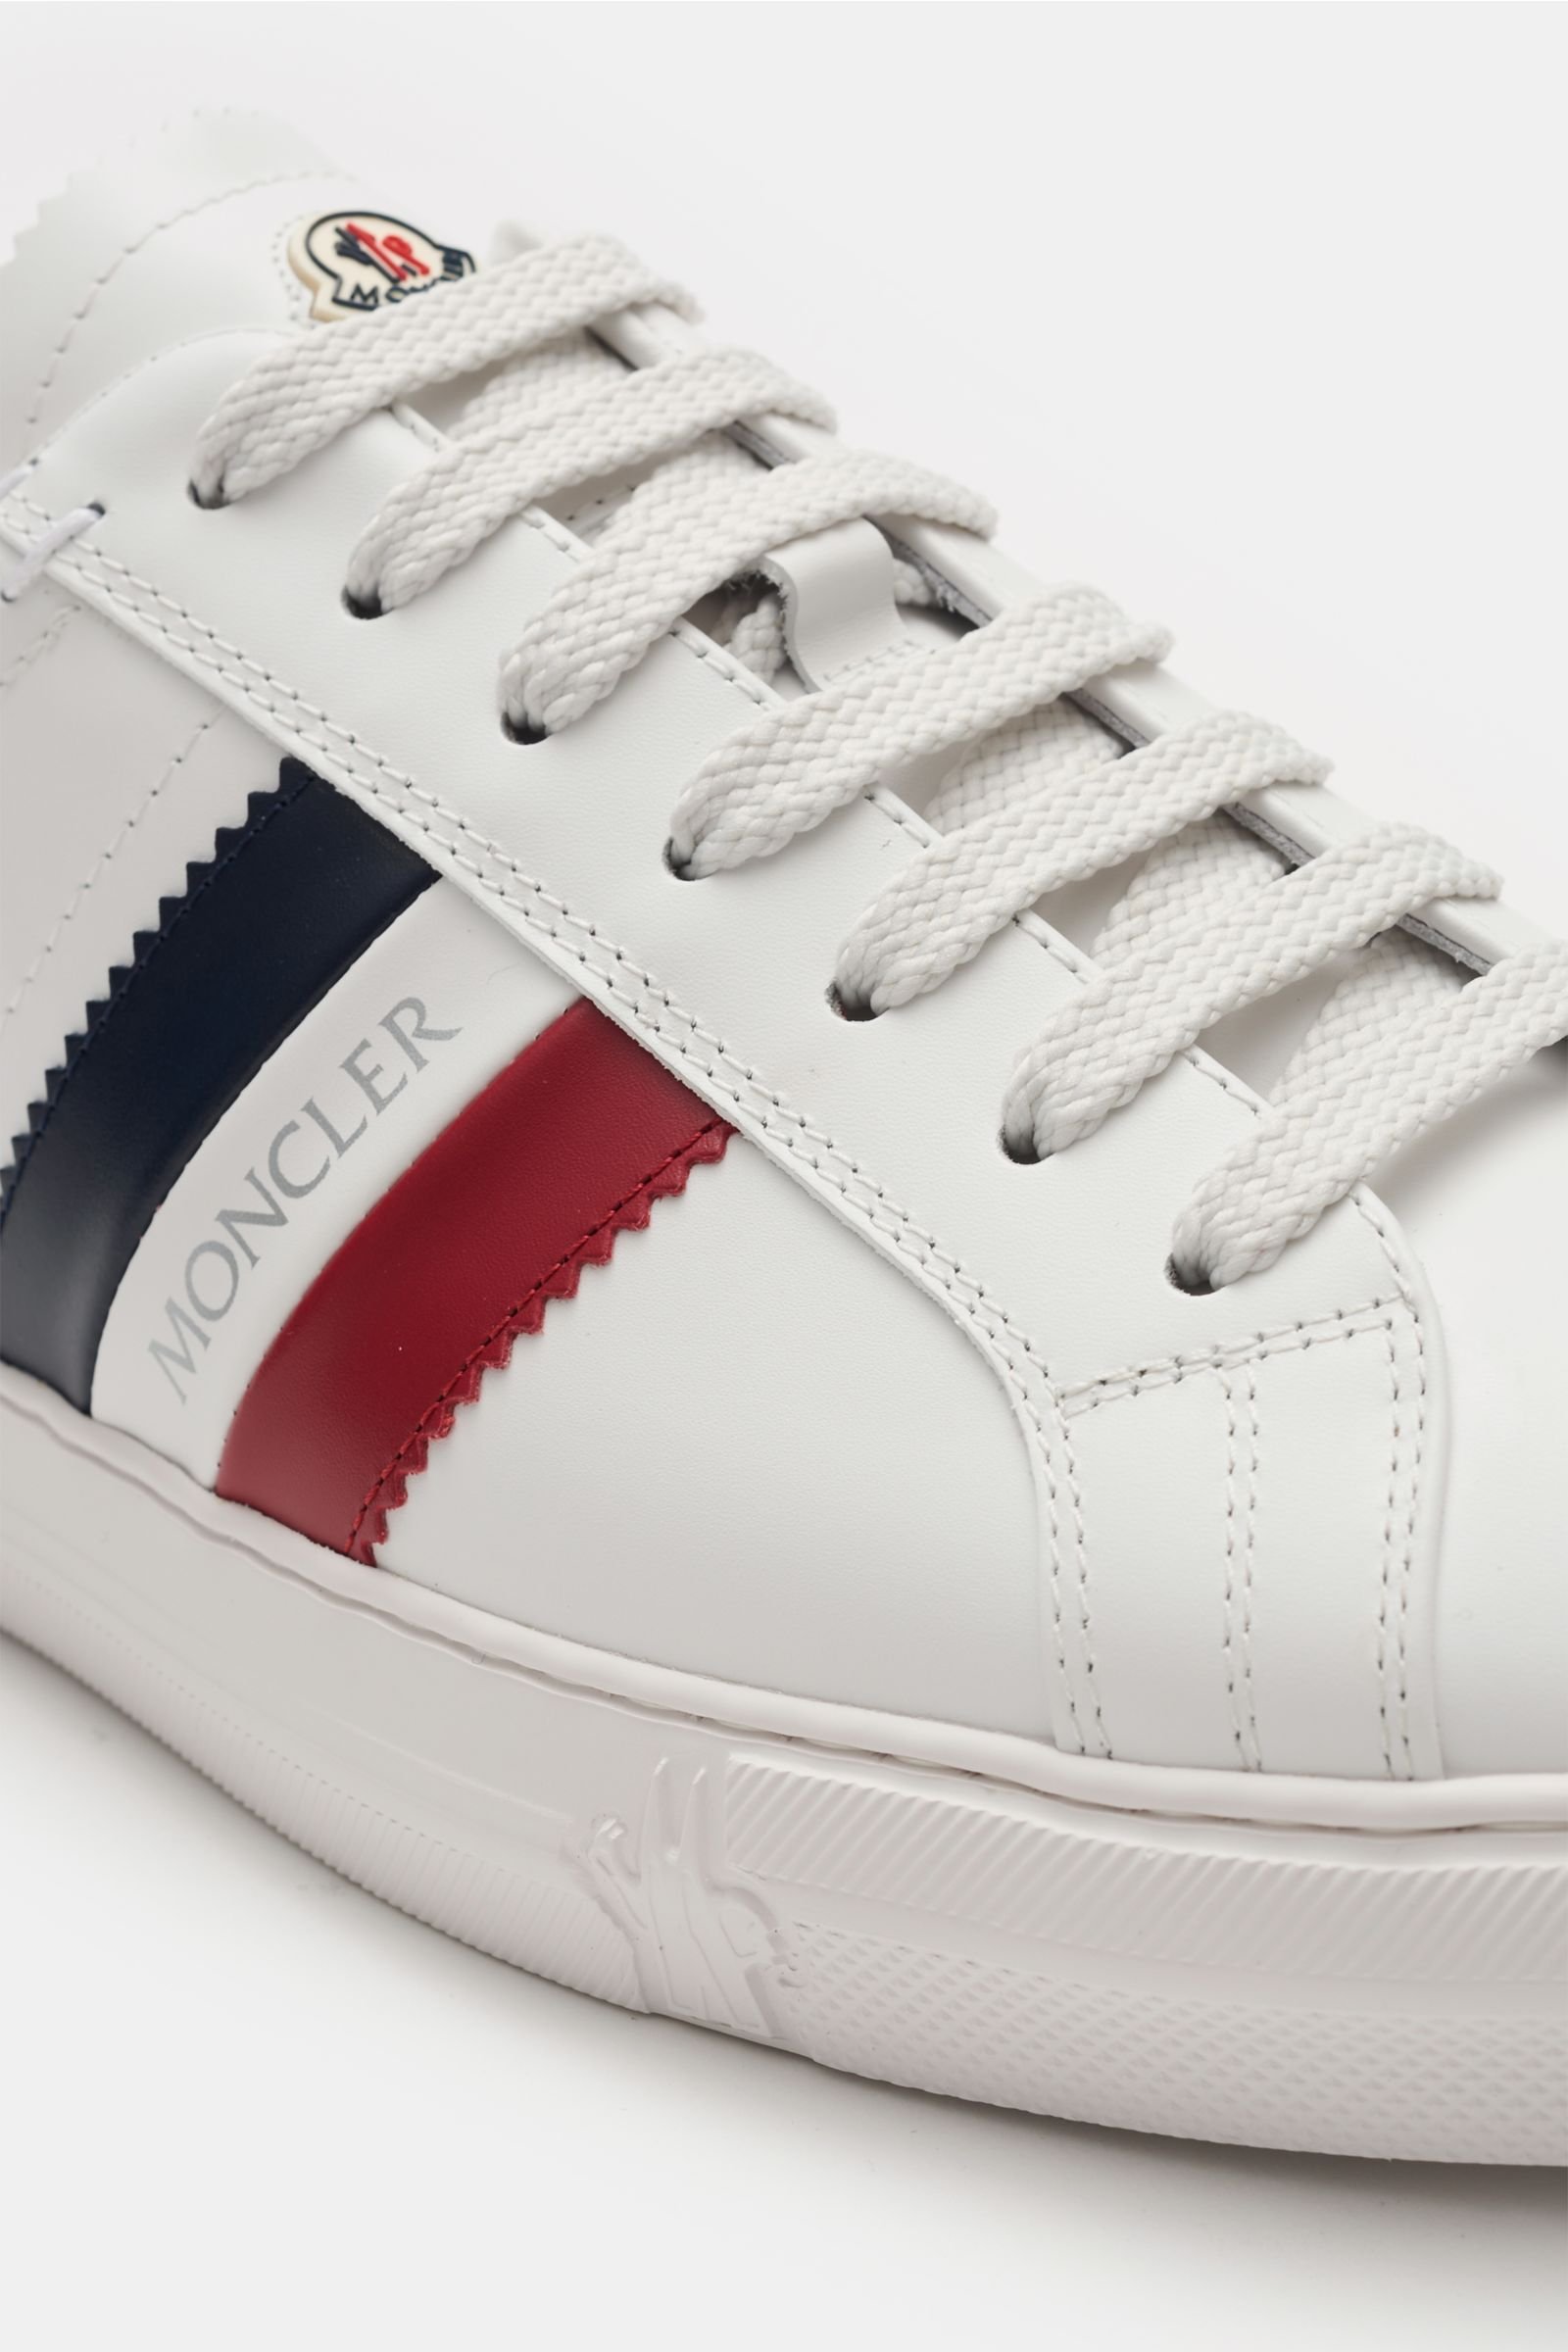 moncler new shoes